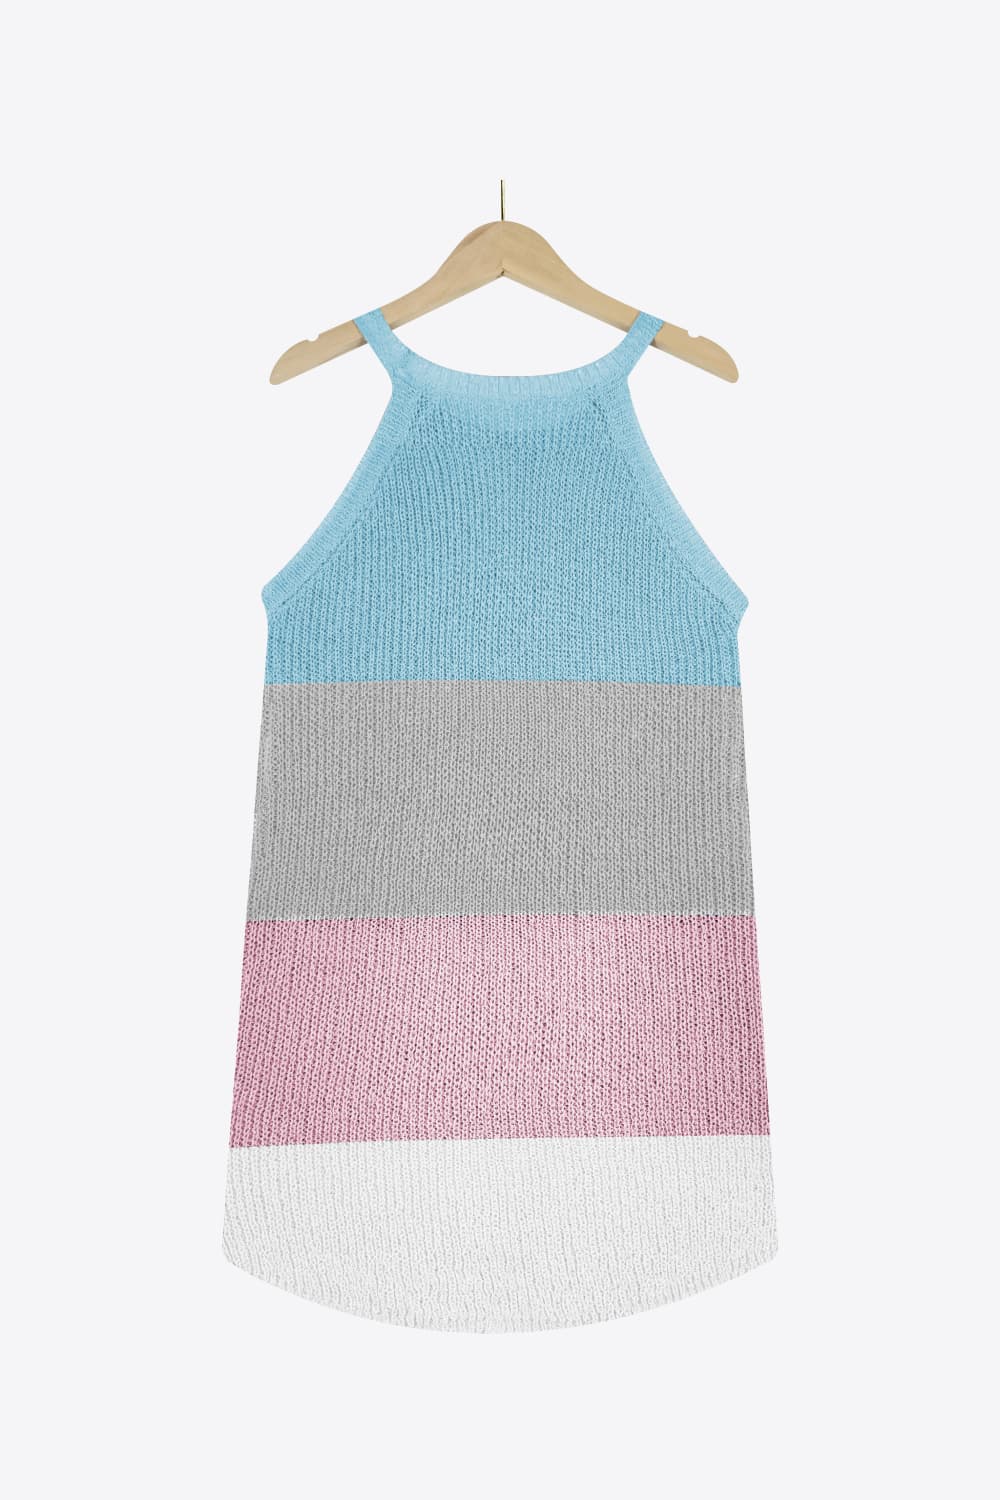 a blue and pink tank top on a hanger